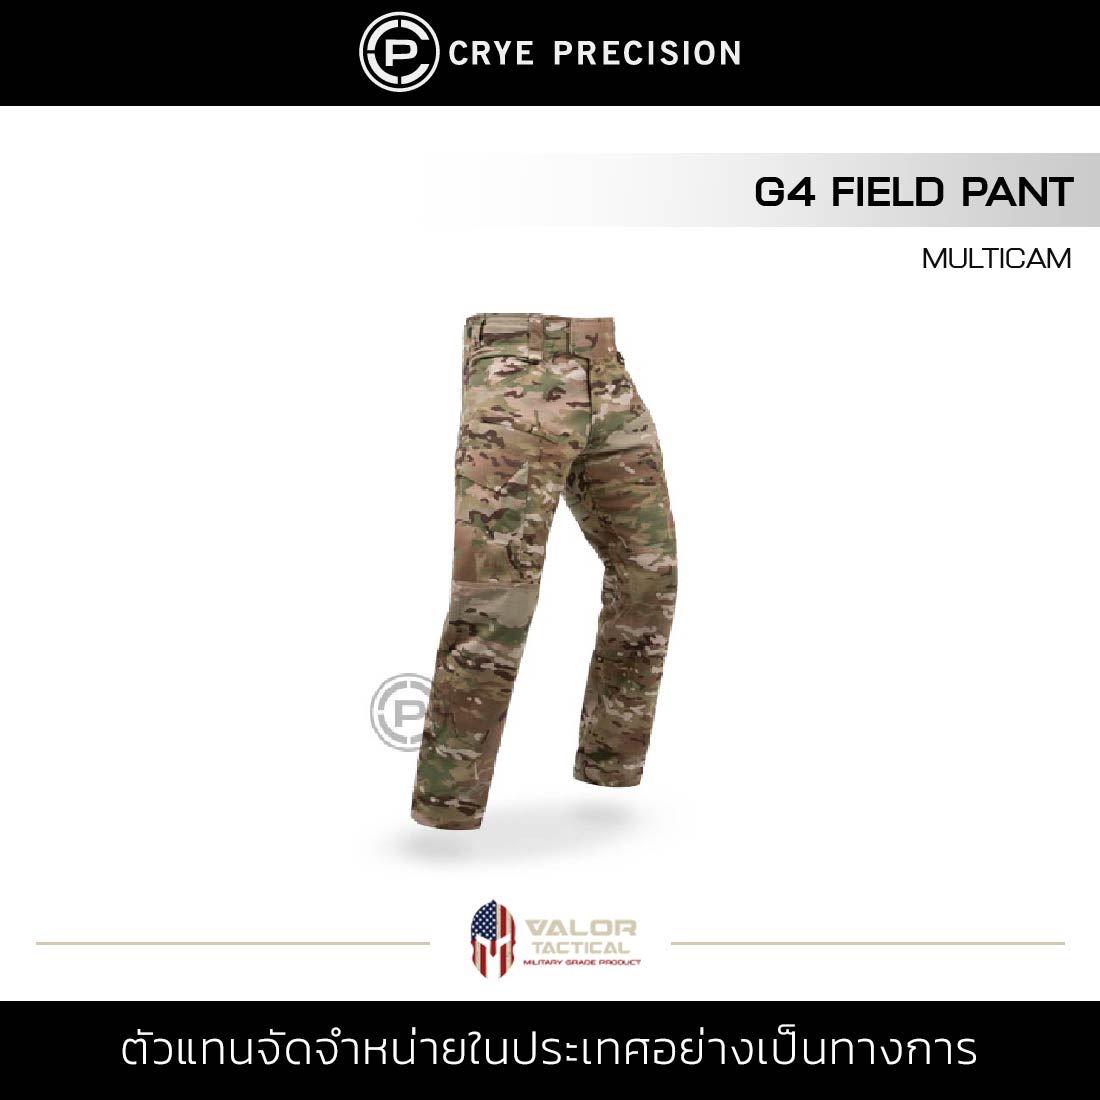 Crye Precision G4 Field Pant MultiCam